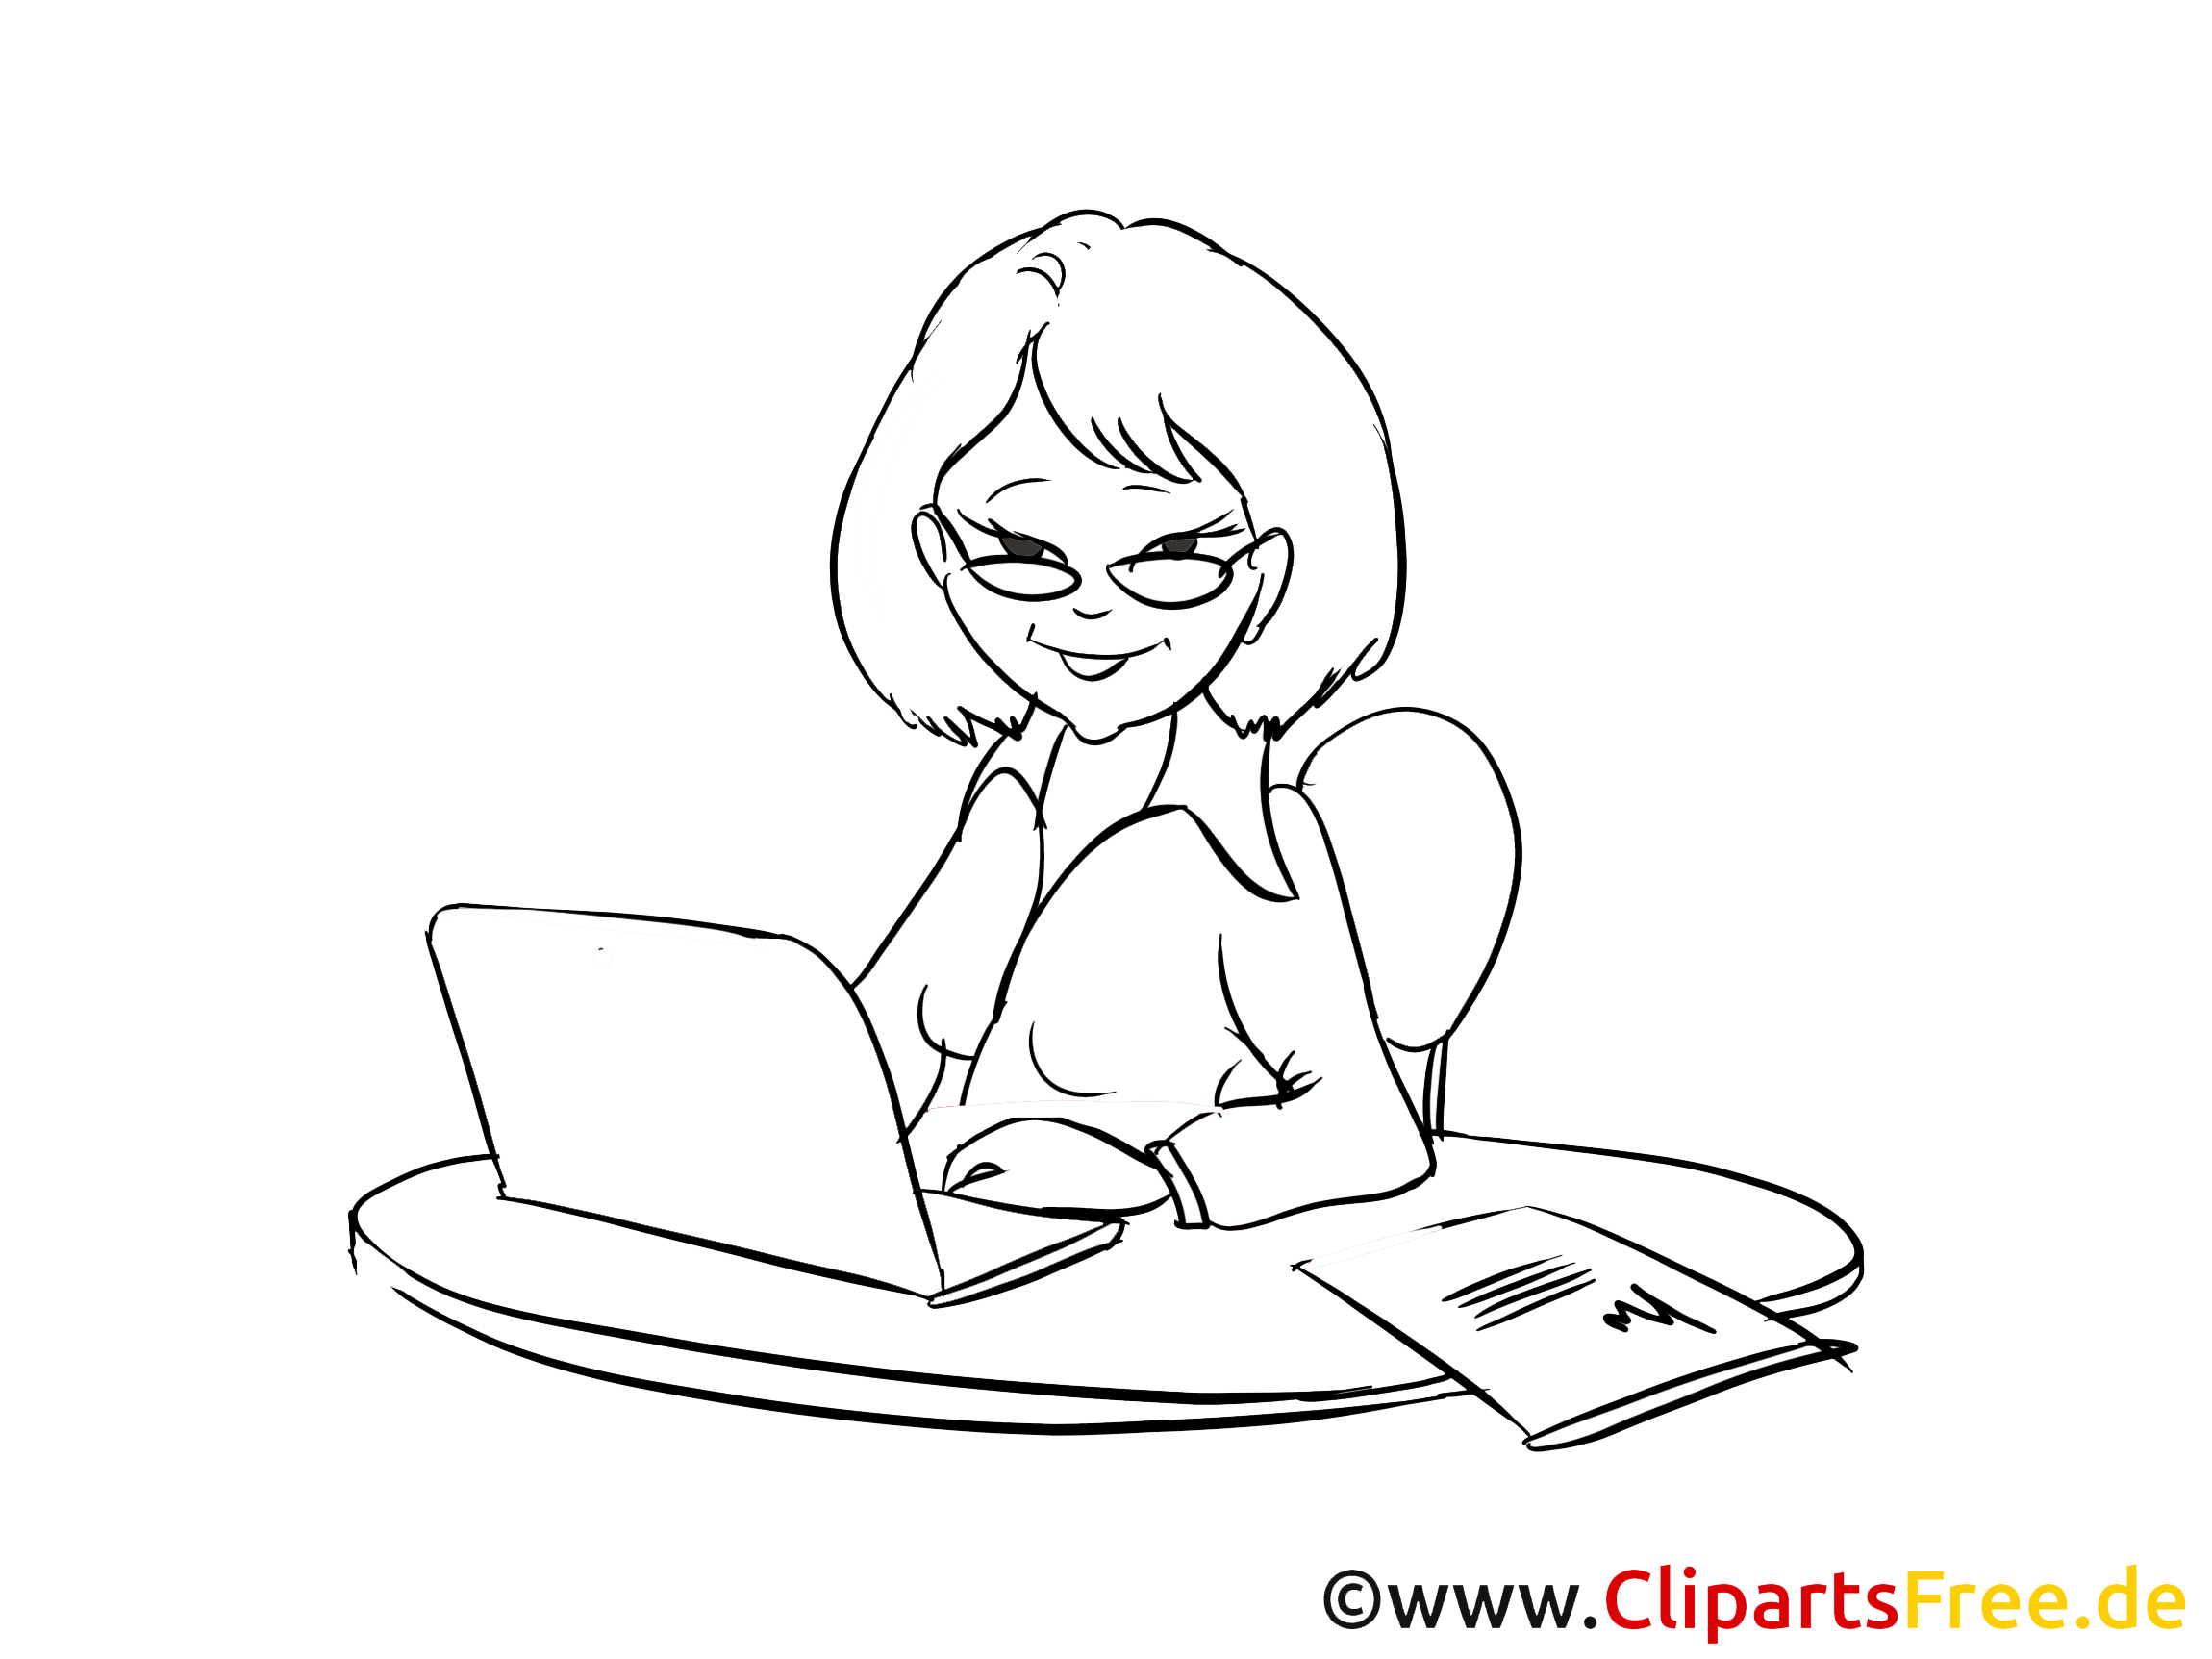 office clipart gallery - photo #32